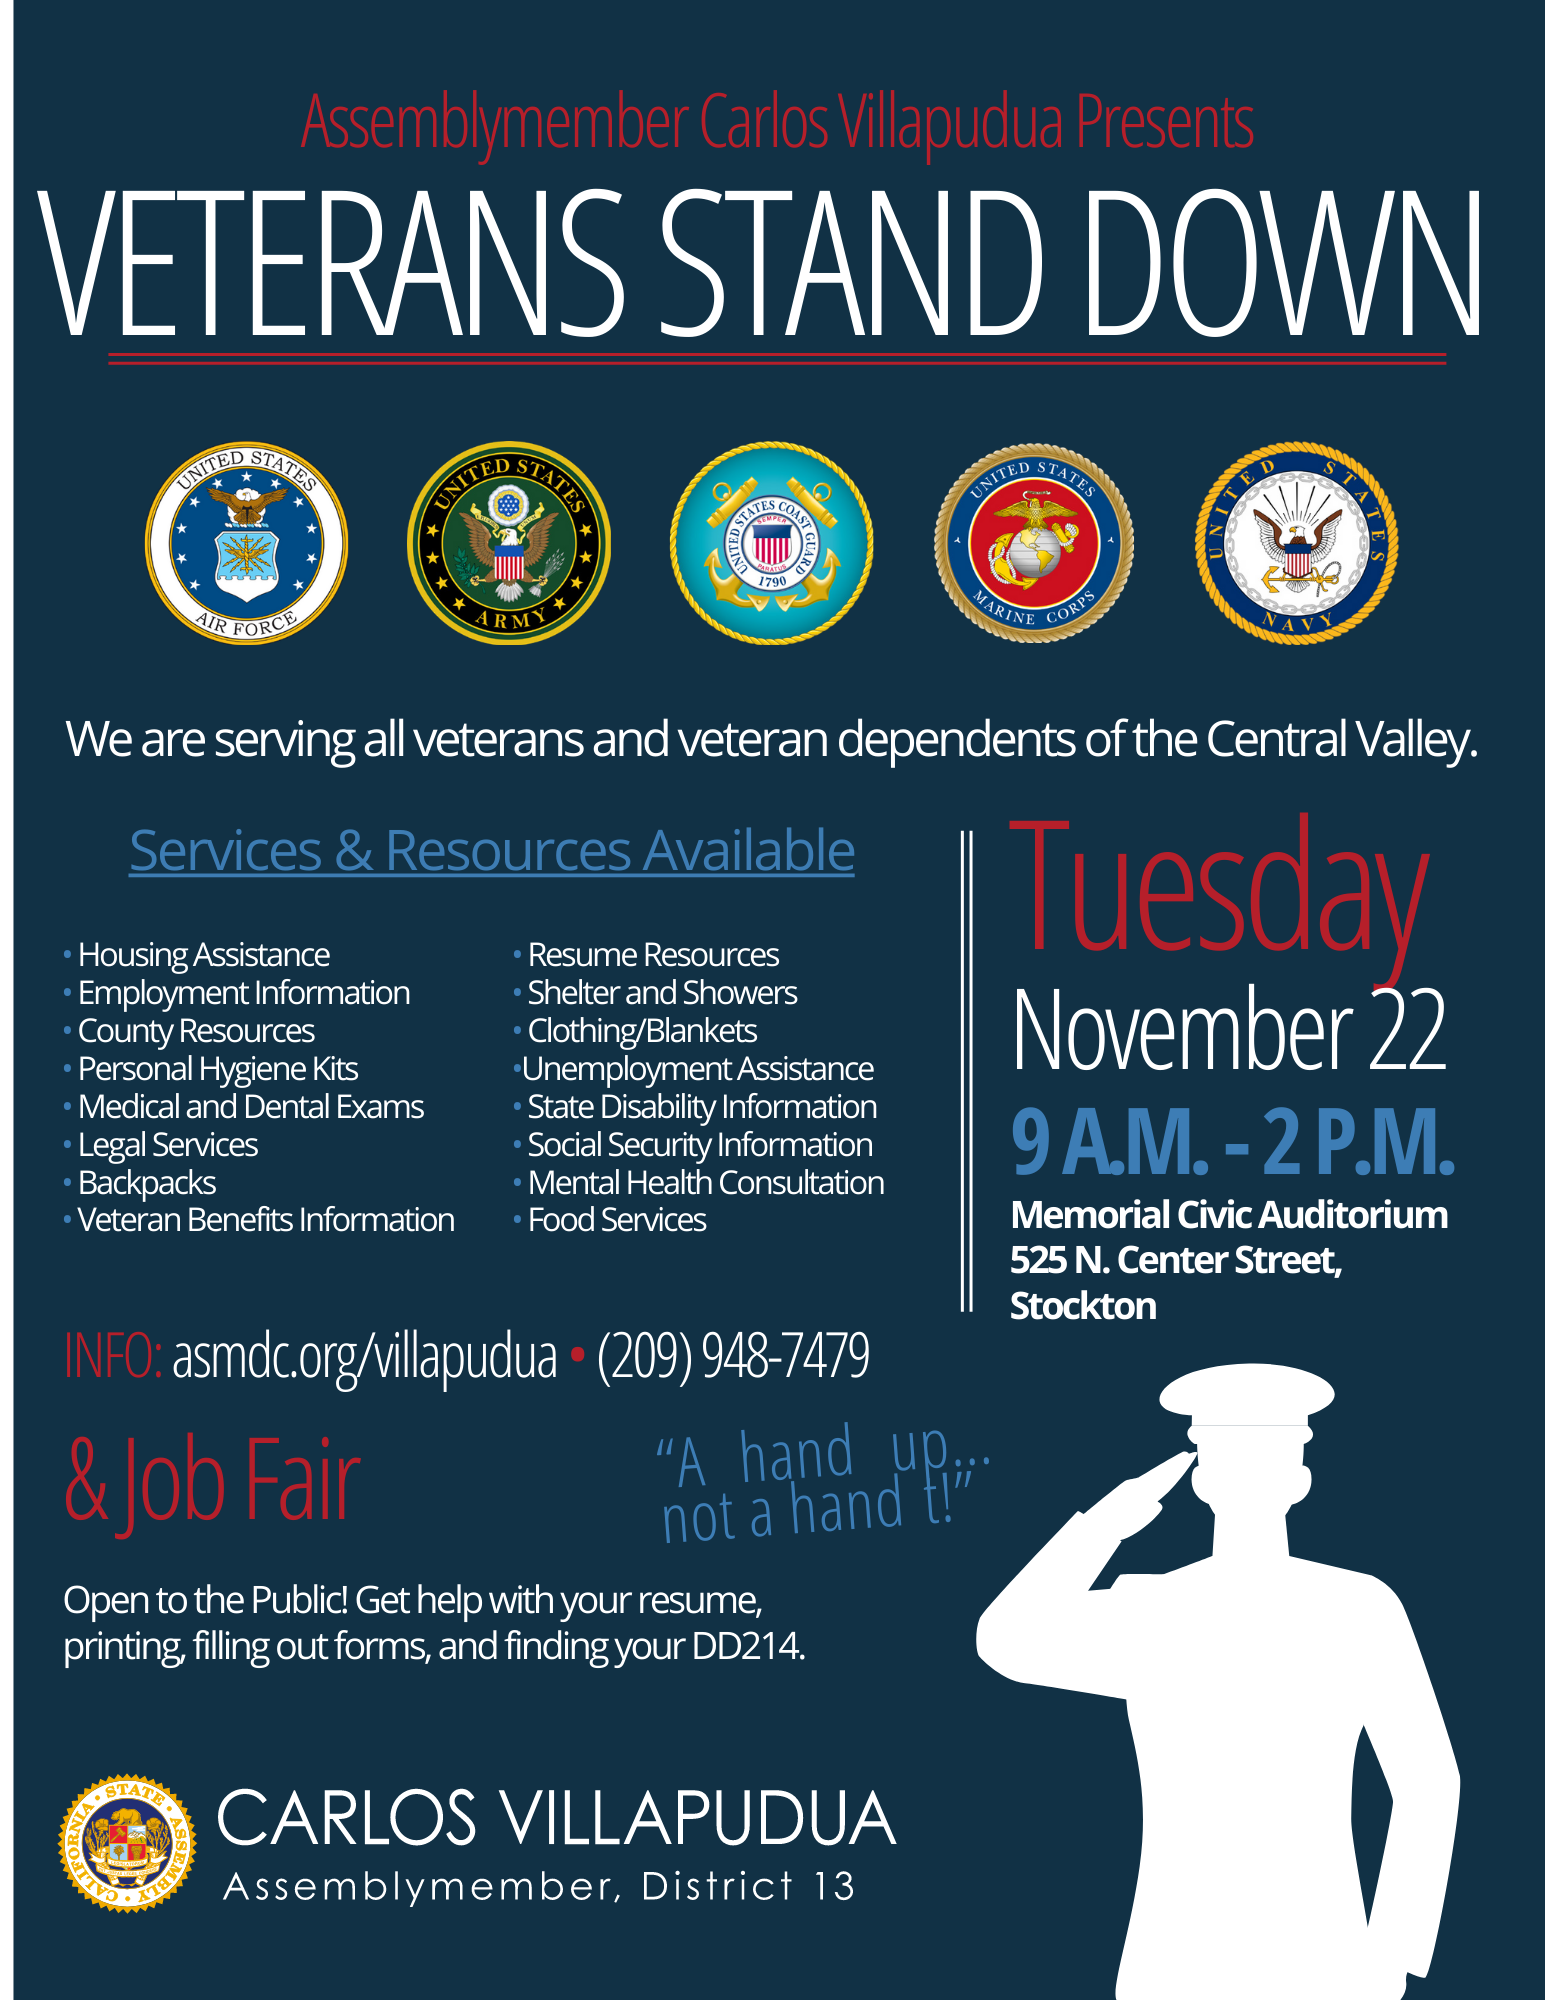 Navy blue background flyer advertising Veterans Stand Down Event. Tuesday, November 22 at 9 a.m. - 2 p.m. at the Stockton Memorial Civic Auditorium